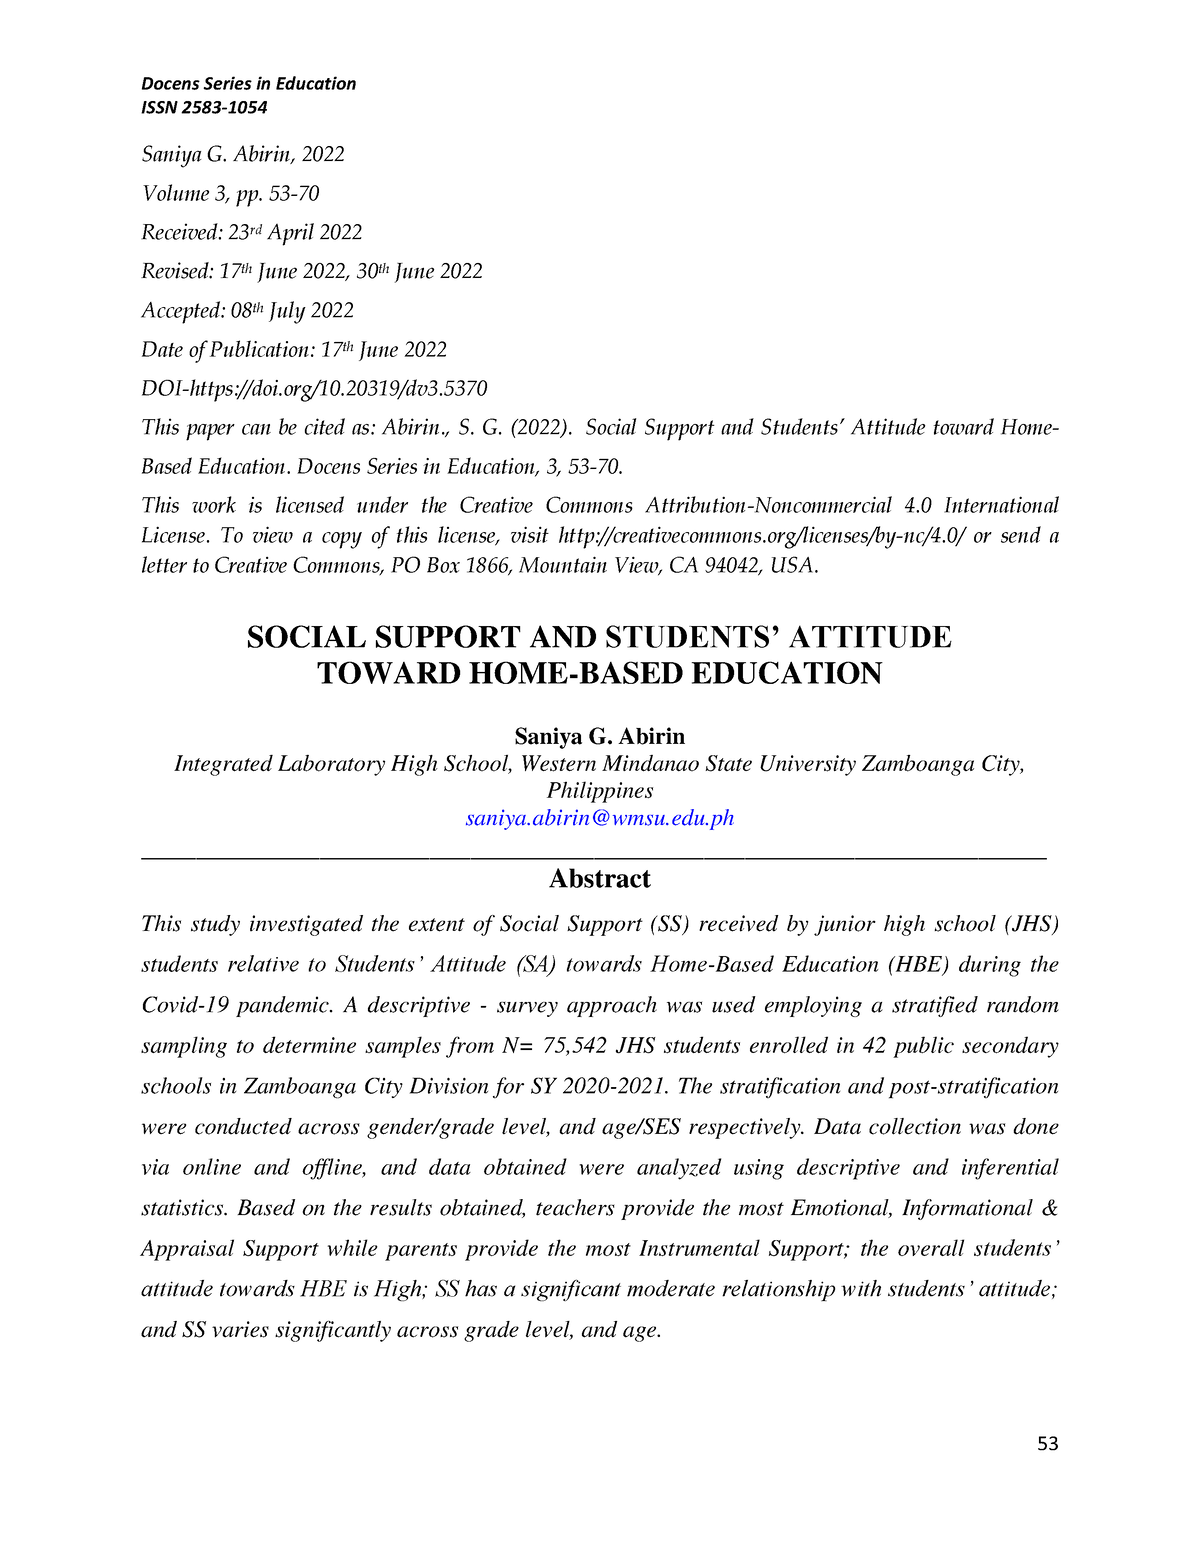 thesis on social support pdf